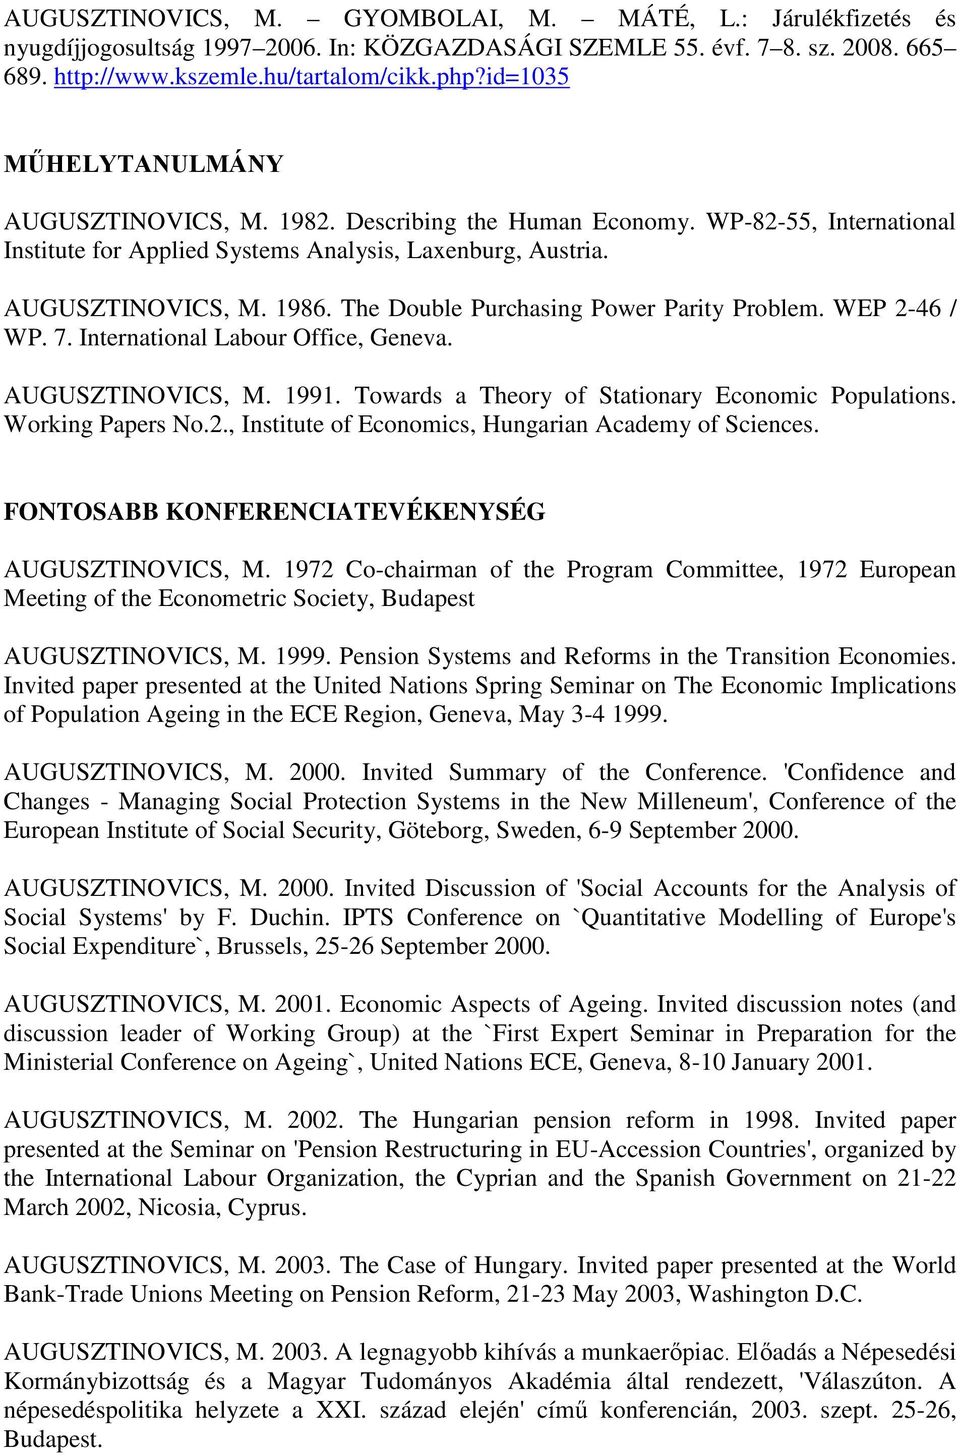 The Double Purchasing Power Parity Problem. WEP 2-46 / WP. 7. International Labour Office, Geneva. AUGUSZTINOVICS, M. 1991. Towards a Theory of Stationary Economic Populations. Working Papers No.2., Institute of Economics, Hungarian Academy of Sciences.